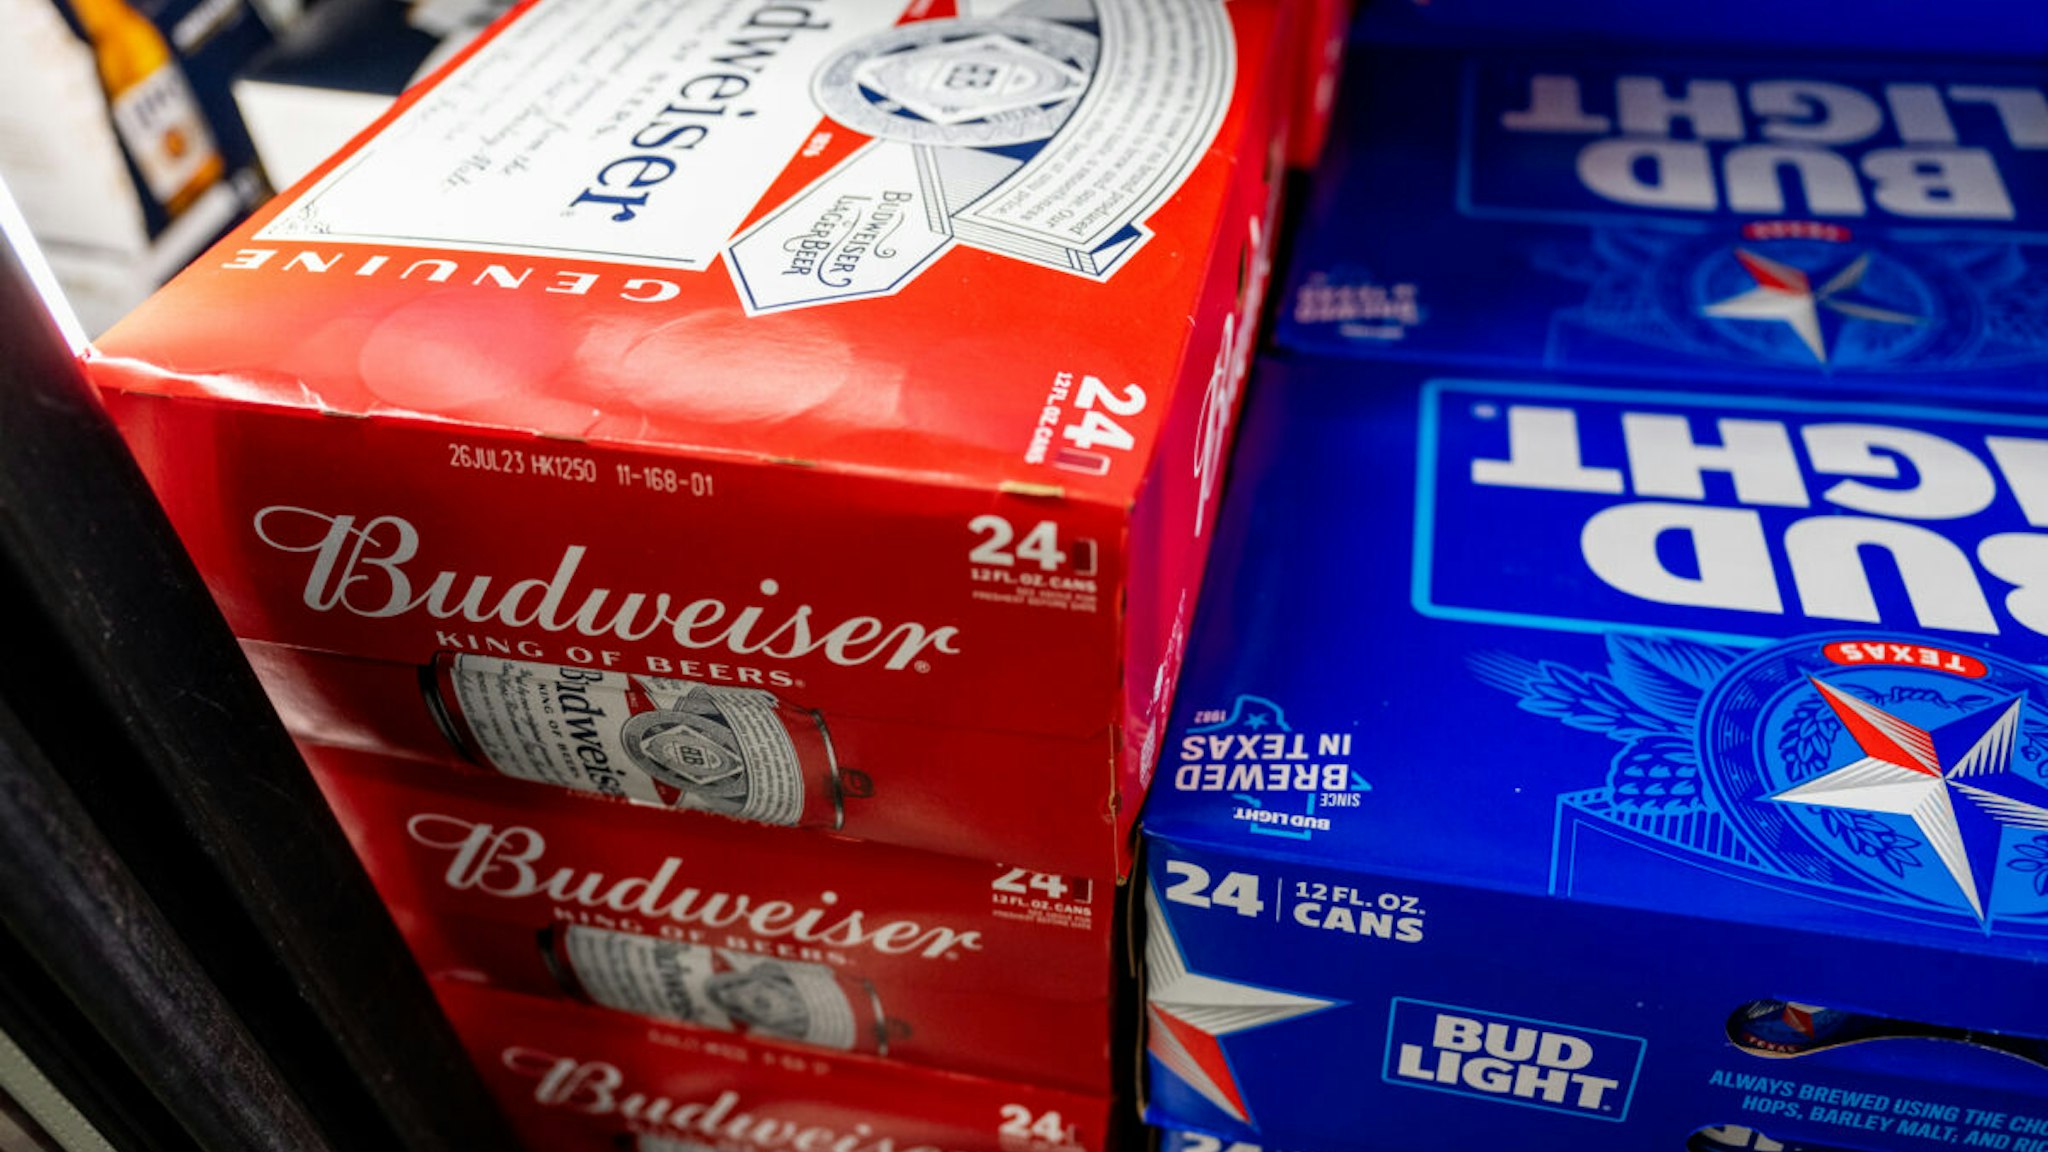 AUSTIN, TEXAS - MARCH 02: Budweiser beer in the brewery section at an H-E-B grocery store on March 02, 2023 in Austin, Texas. AB InBev, the largest brewer in the world, reported a drop in fourth quarter volume as shares have toppled as low as 4.5% this week.